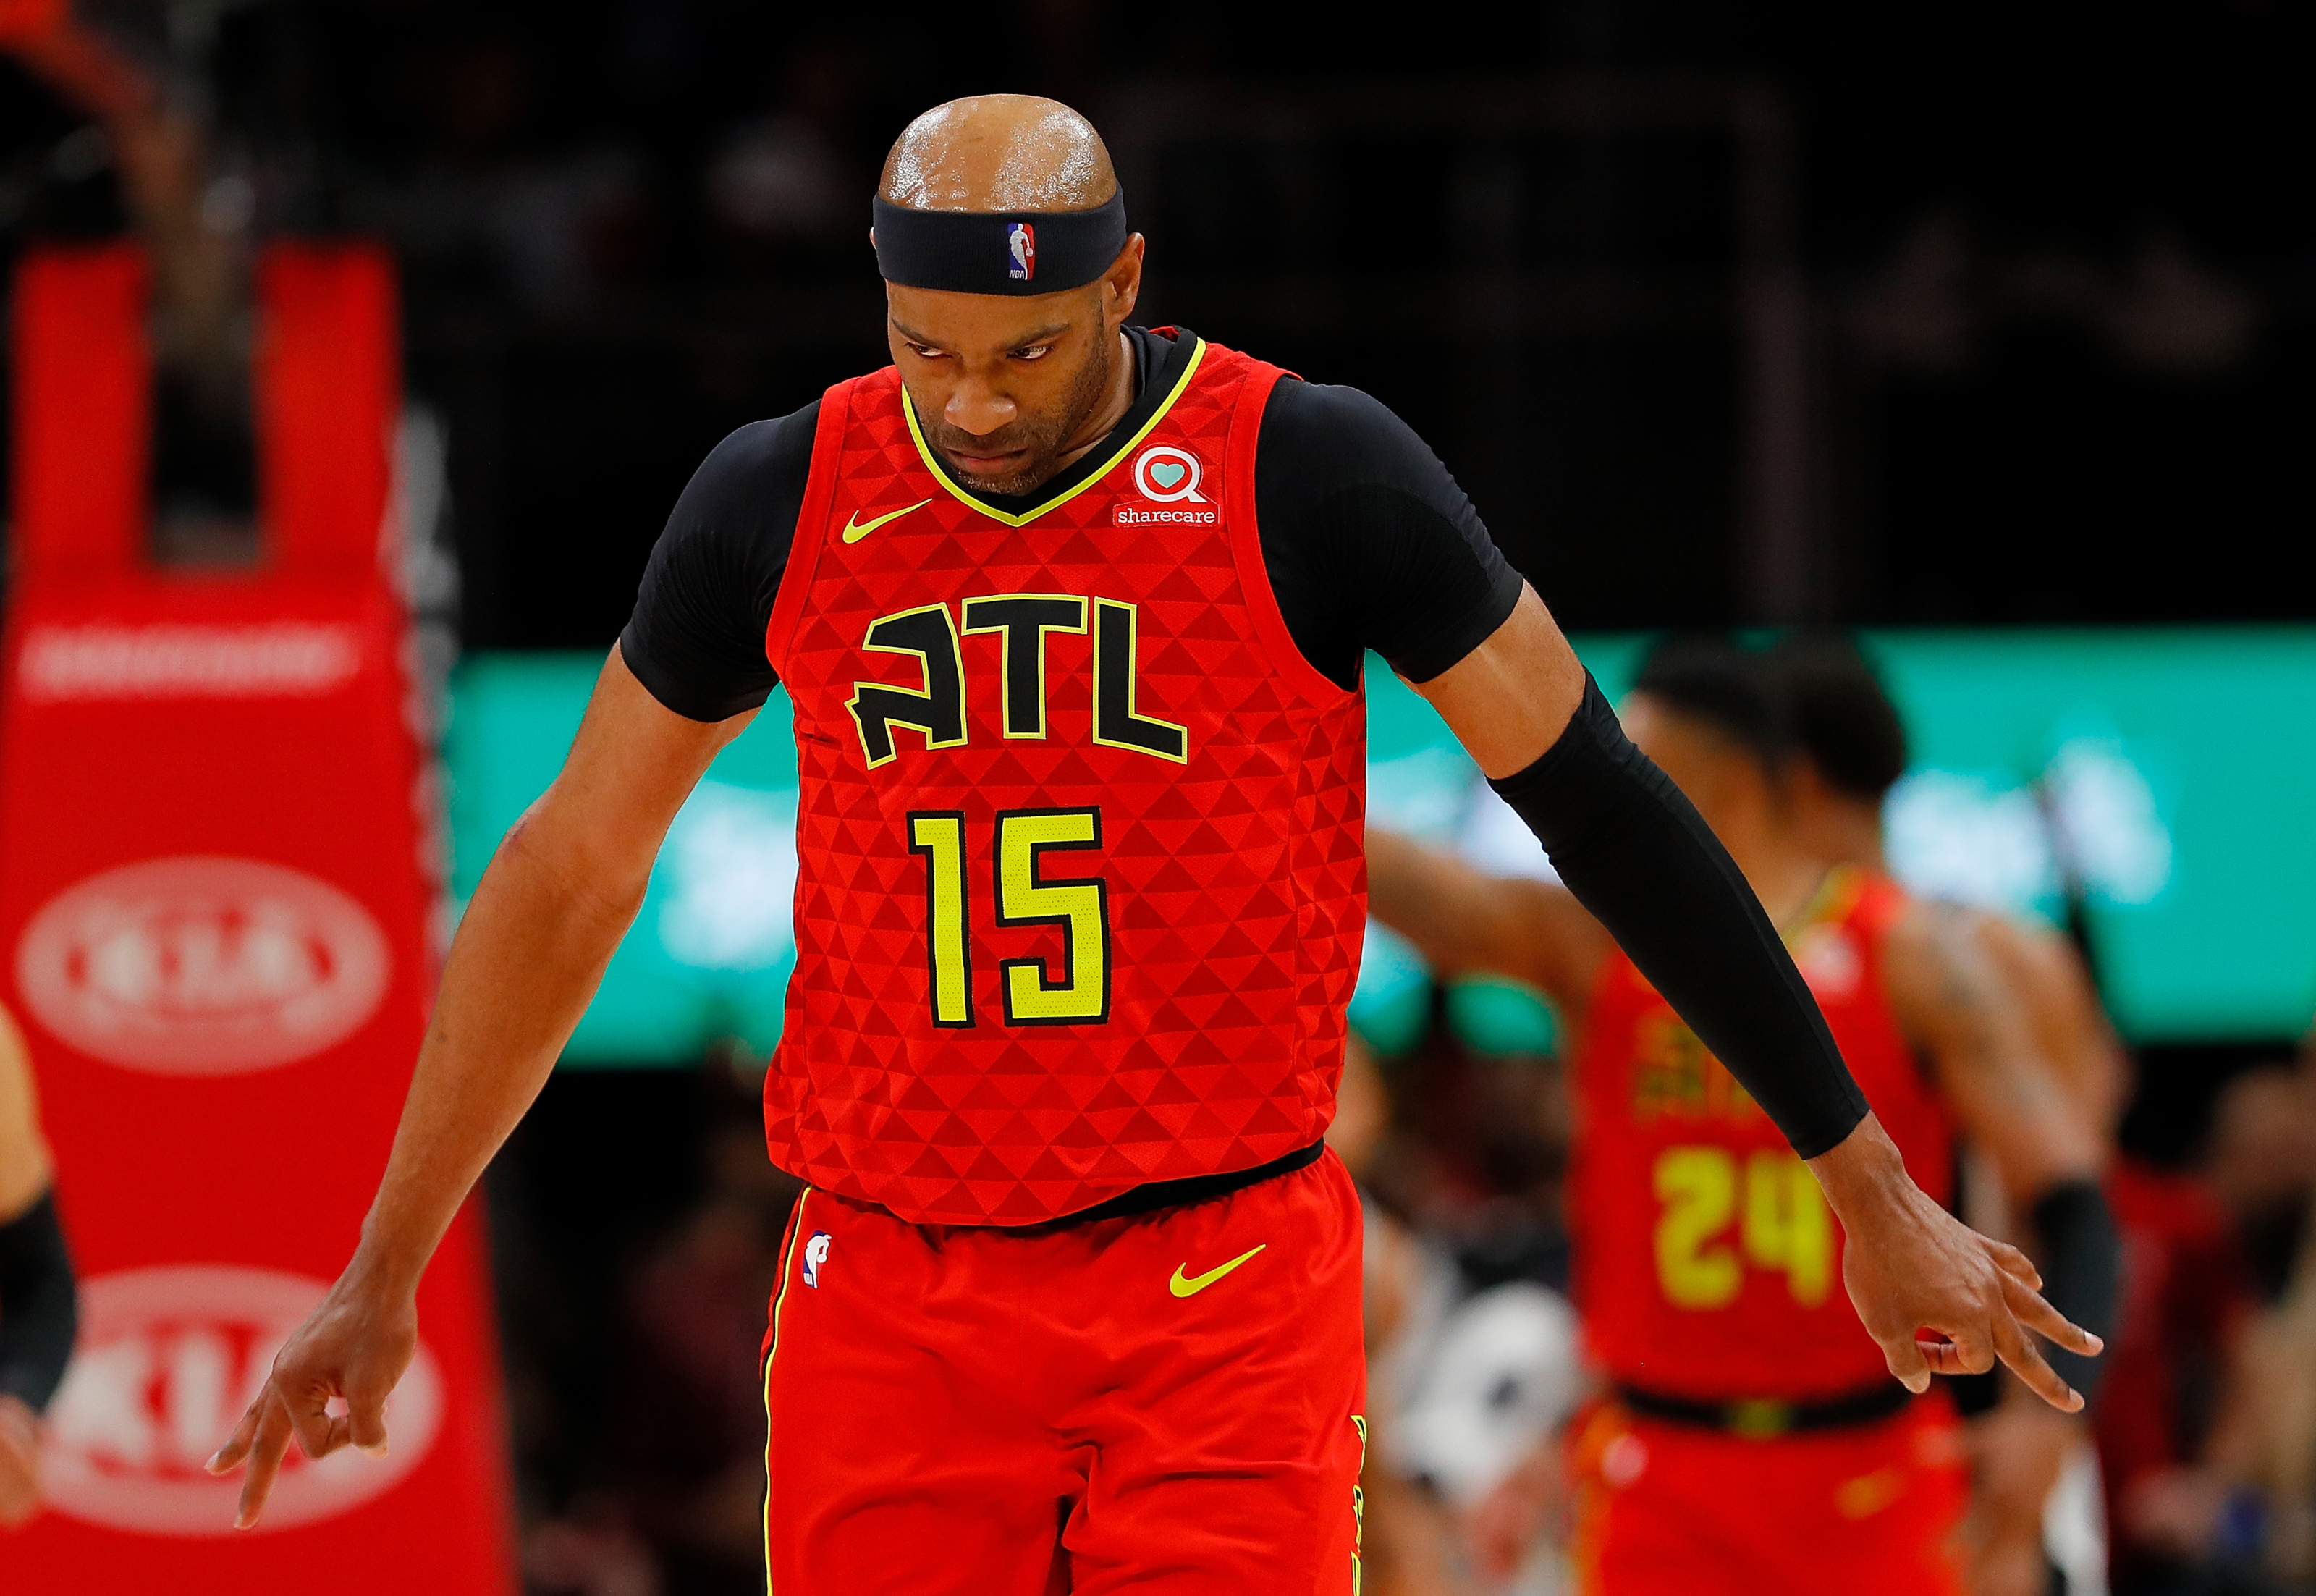 Twitter reacts to news 41-year-old Vince Carter will join Hawks